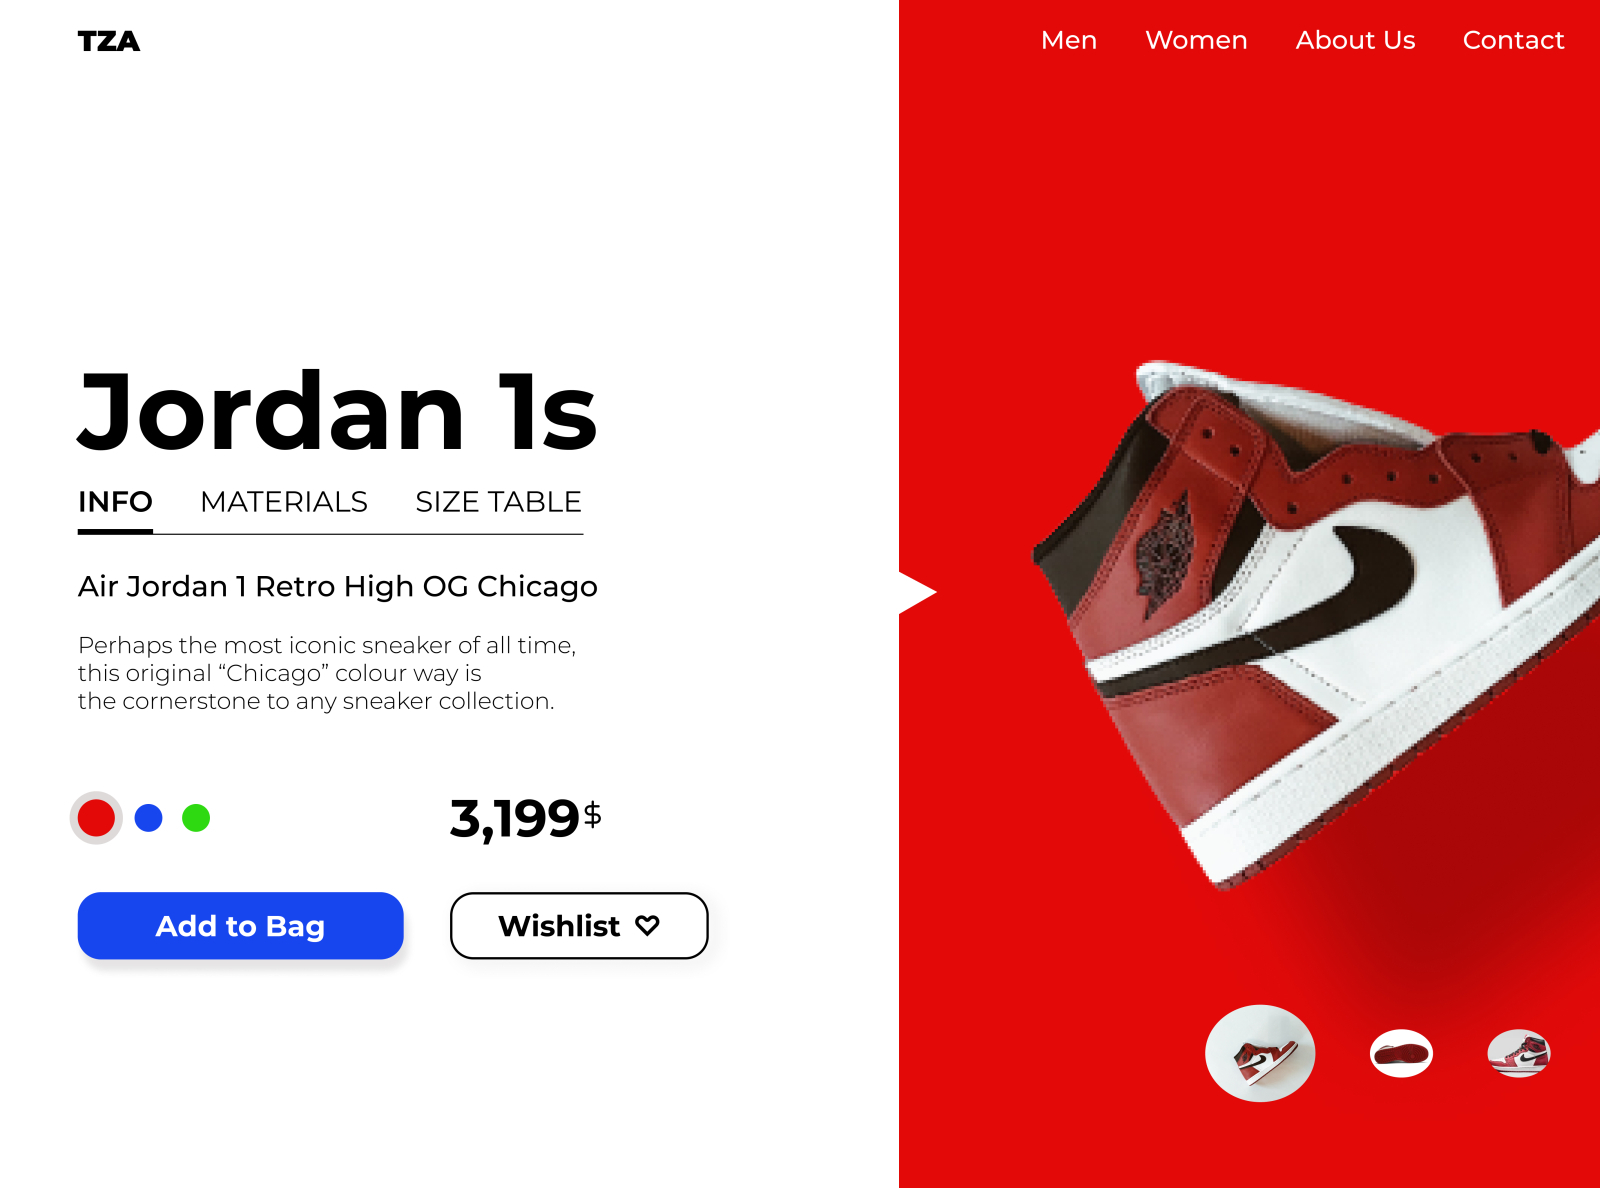 Product Page Design by Oyegun S. Oluwatamilore on Dribbble